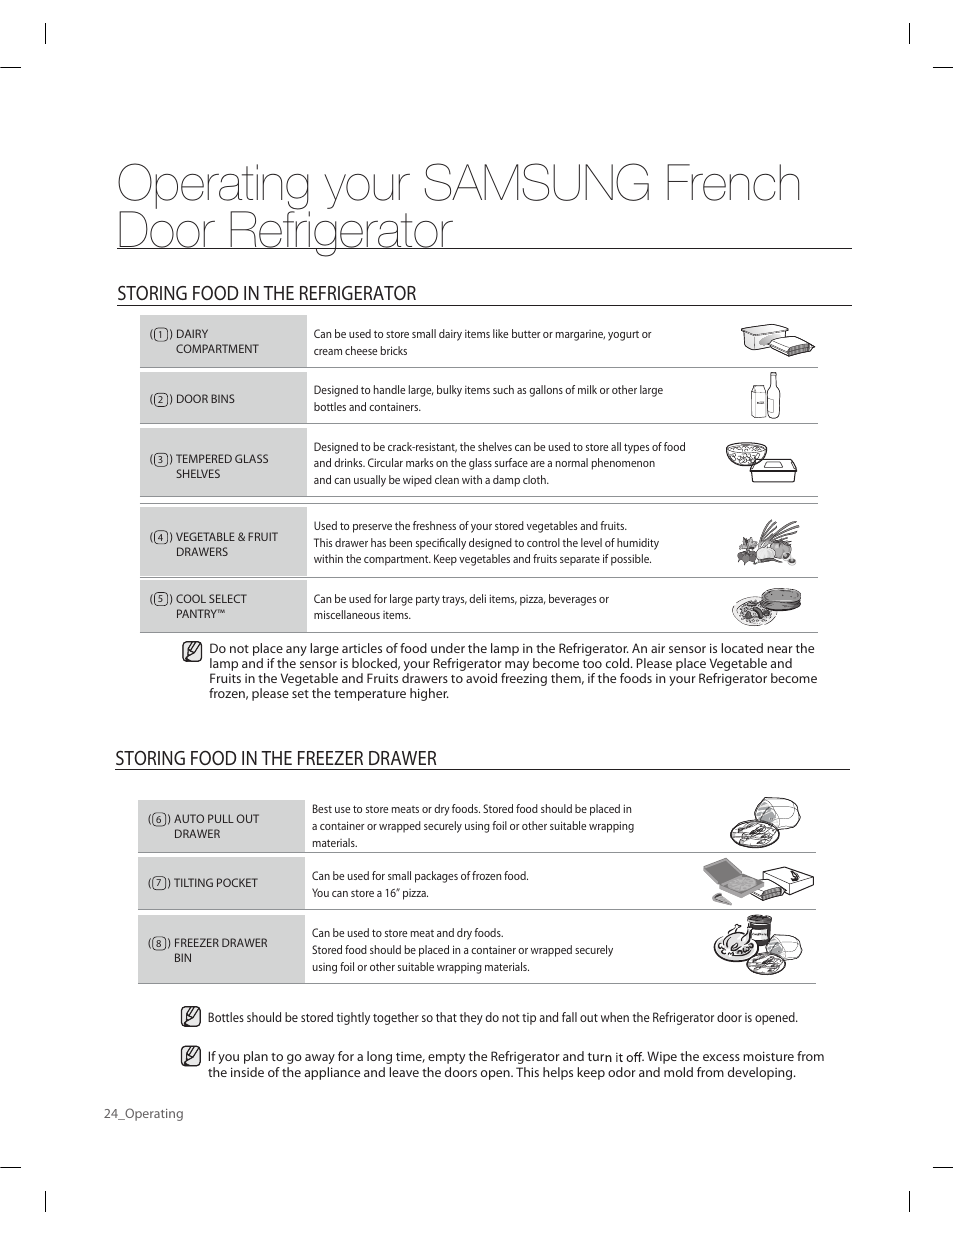 Operating your samsung french door refrigerator, Storing food in the